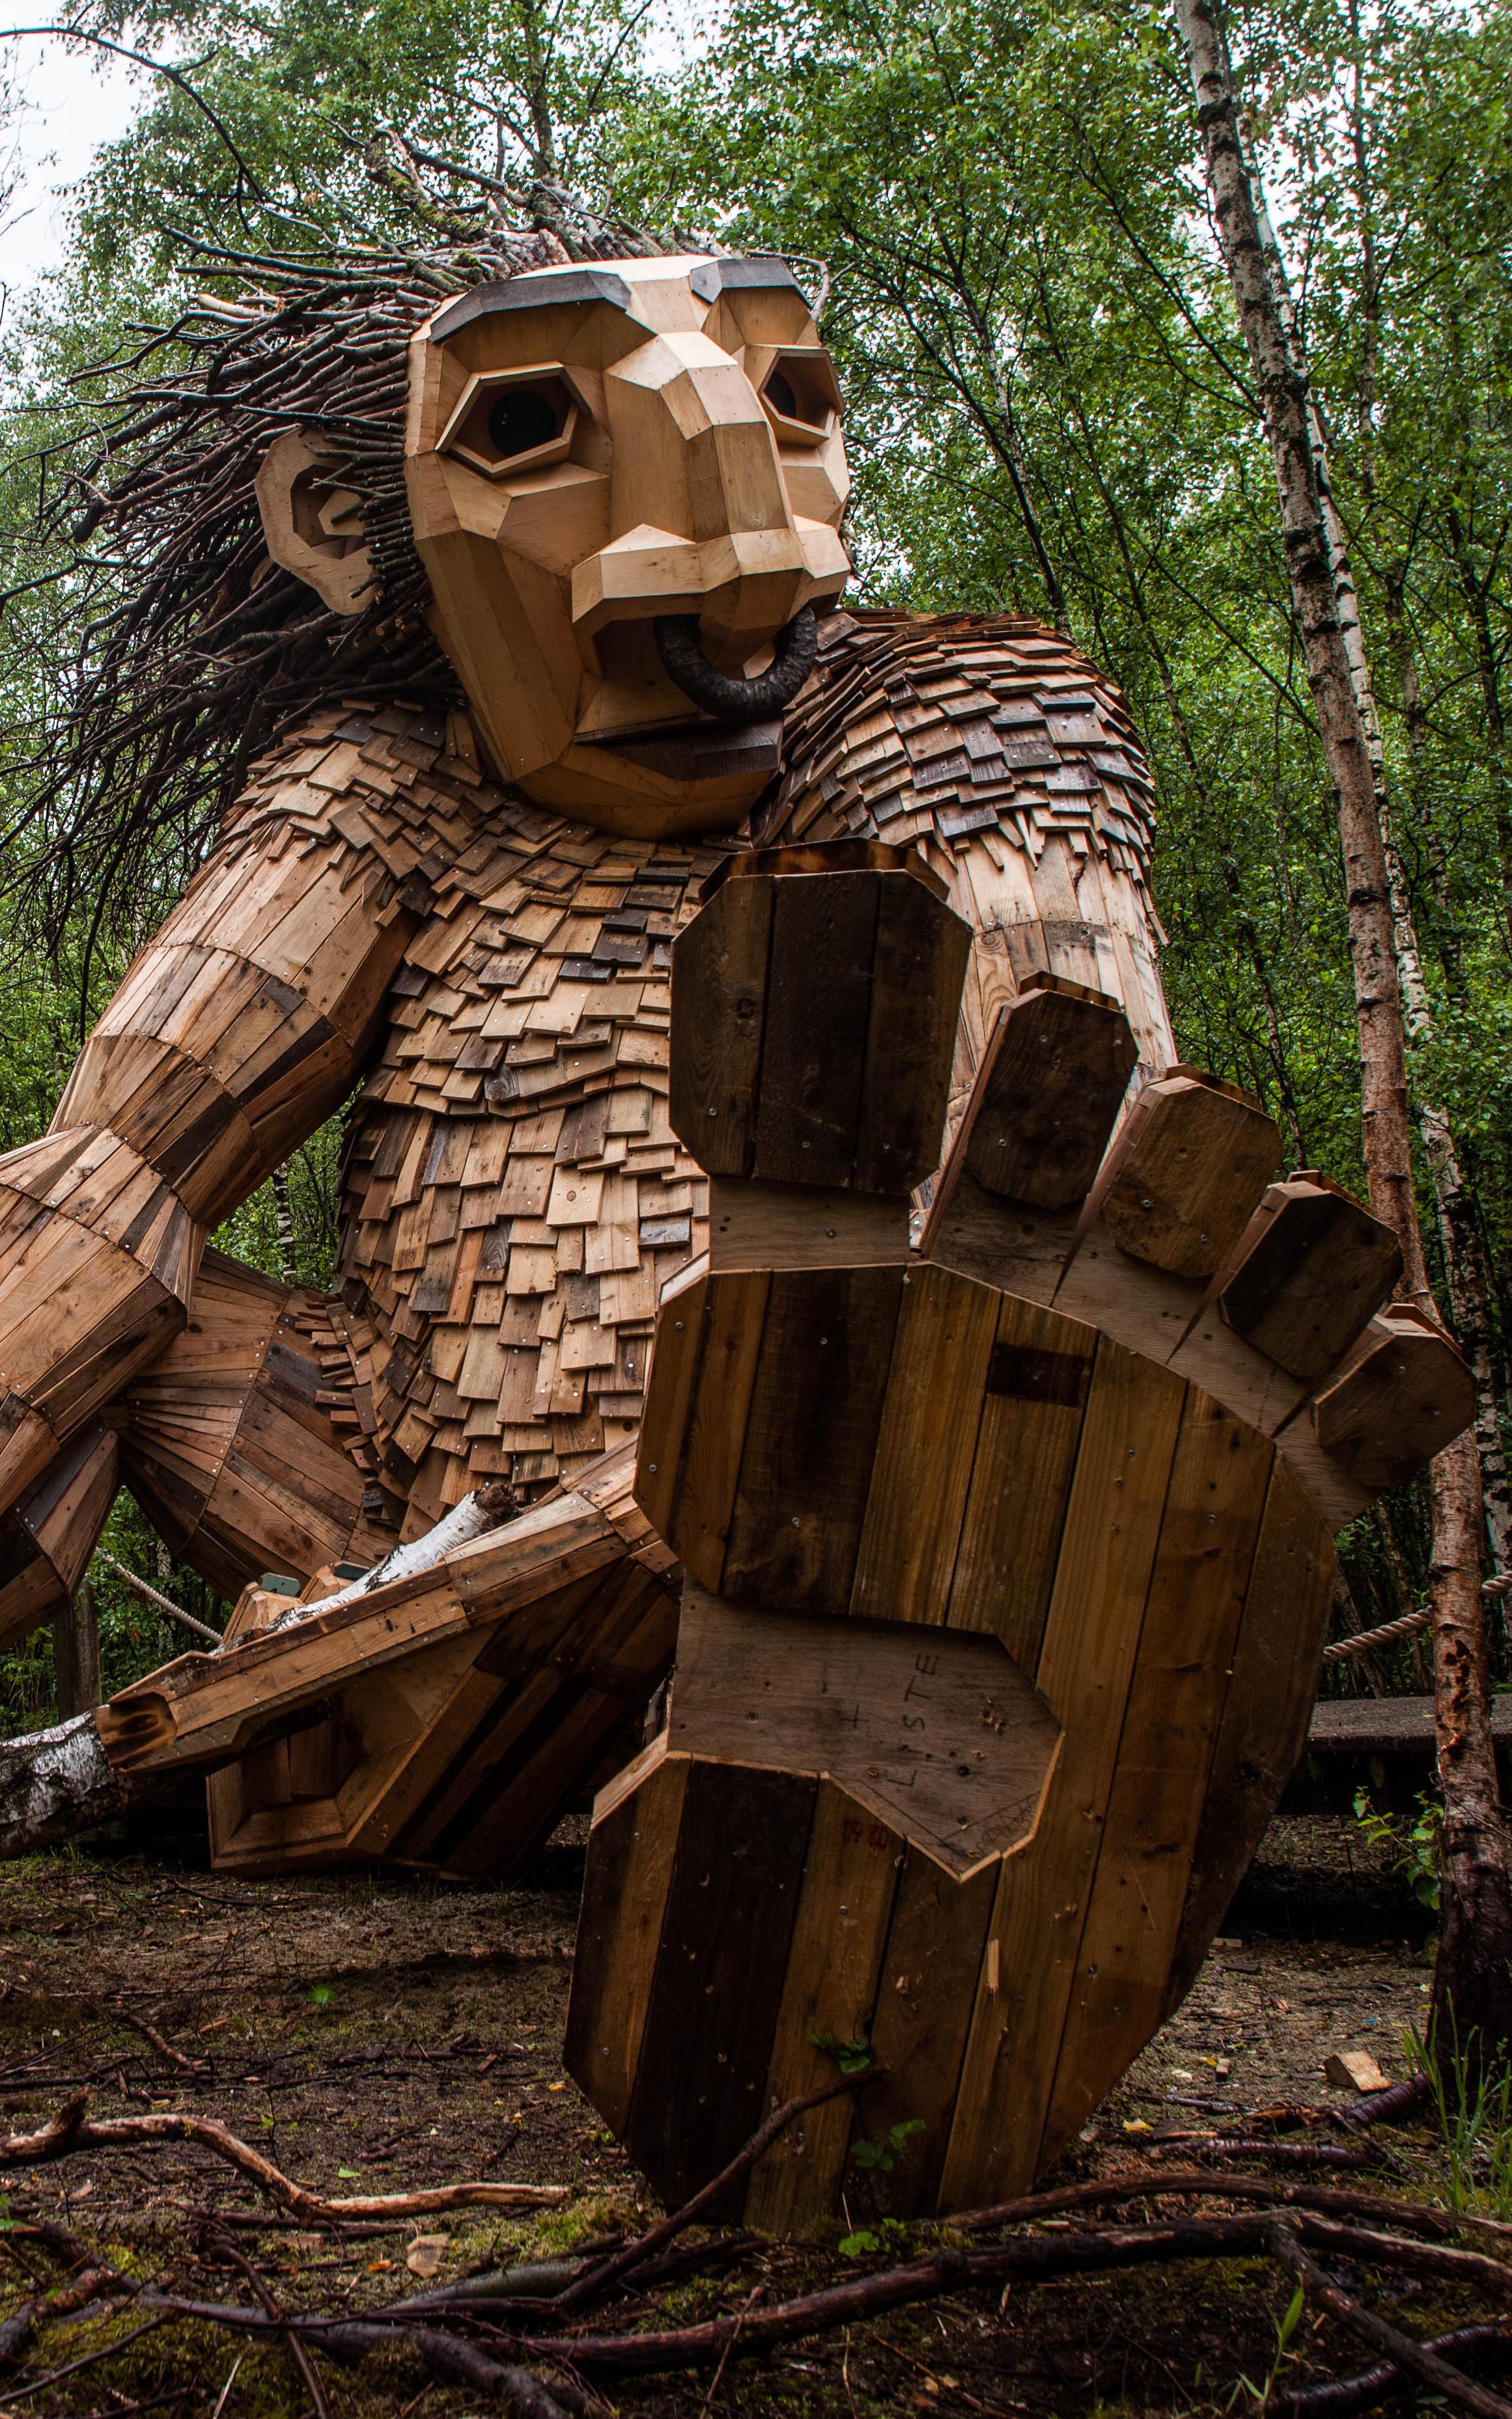 Beautiful News- Large sculpture in a forest